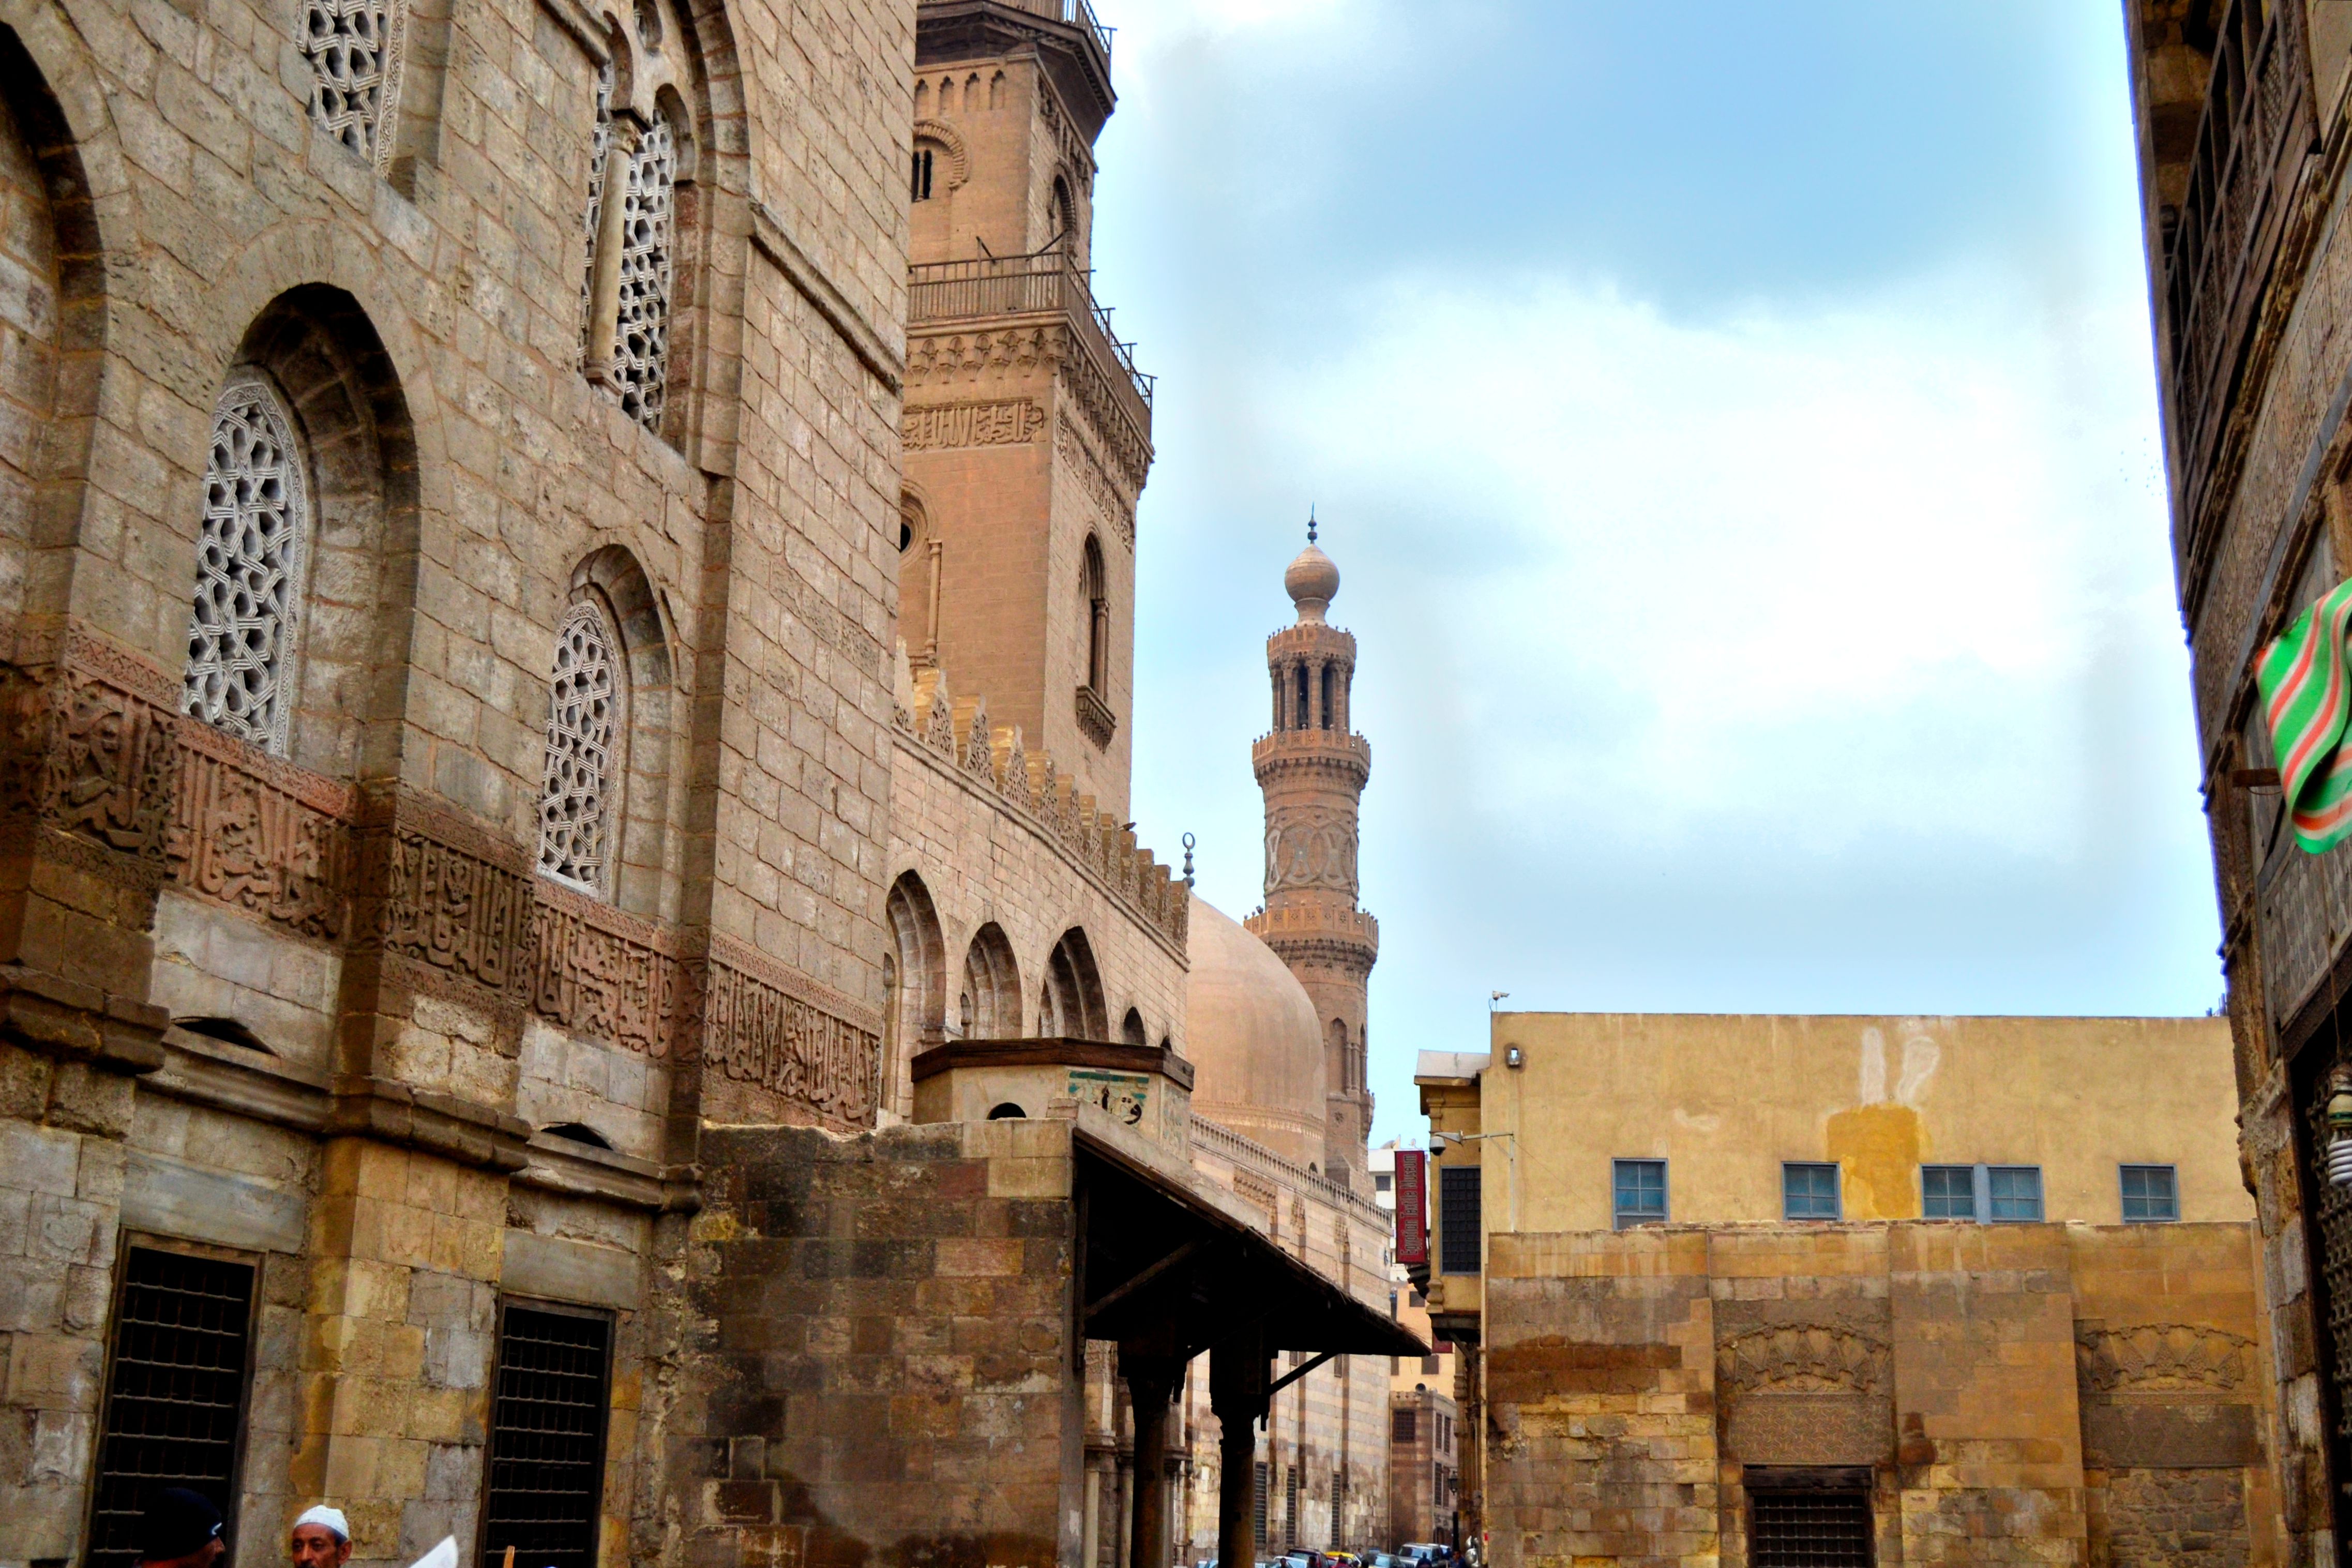 The Islamic architecture coupled with the bustling markets sends you back in time.